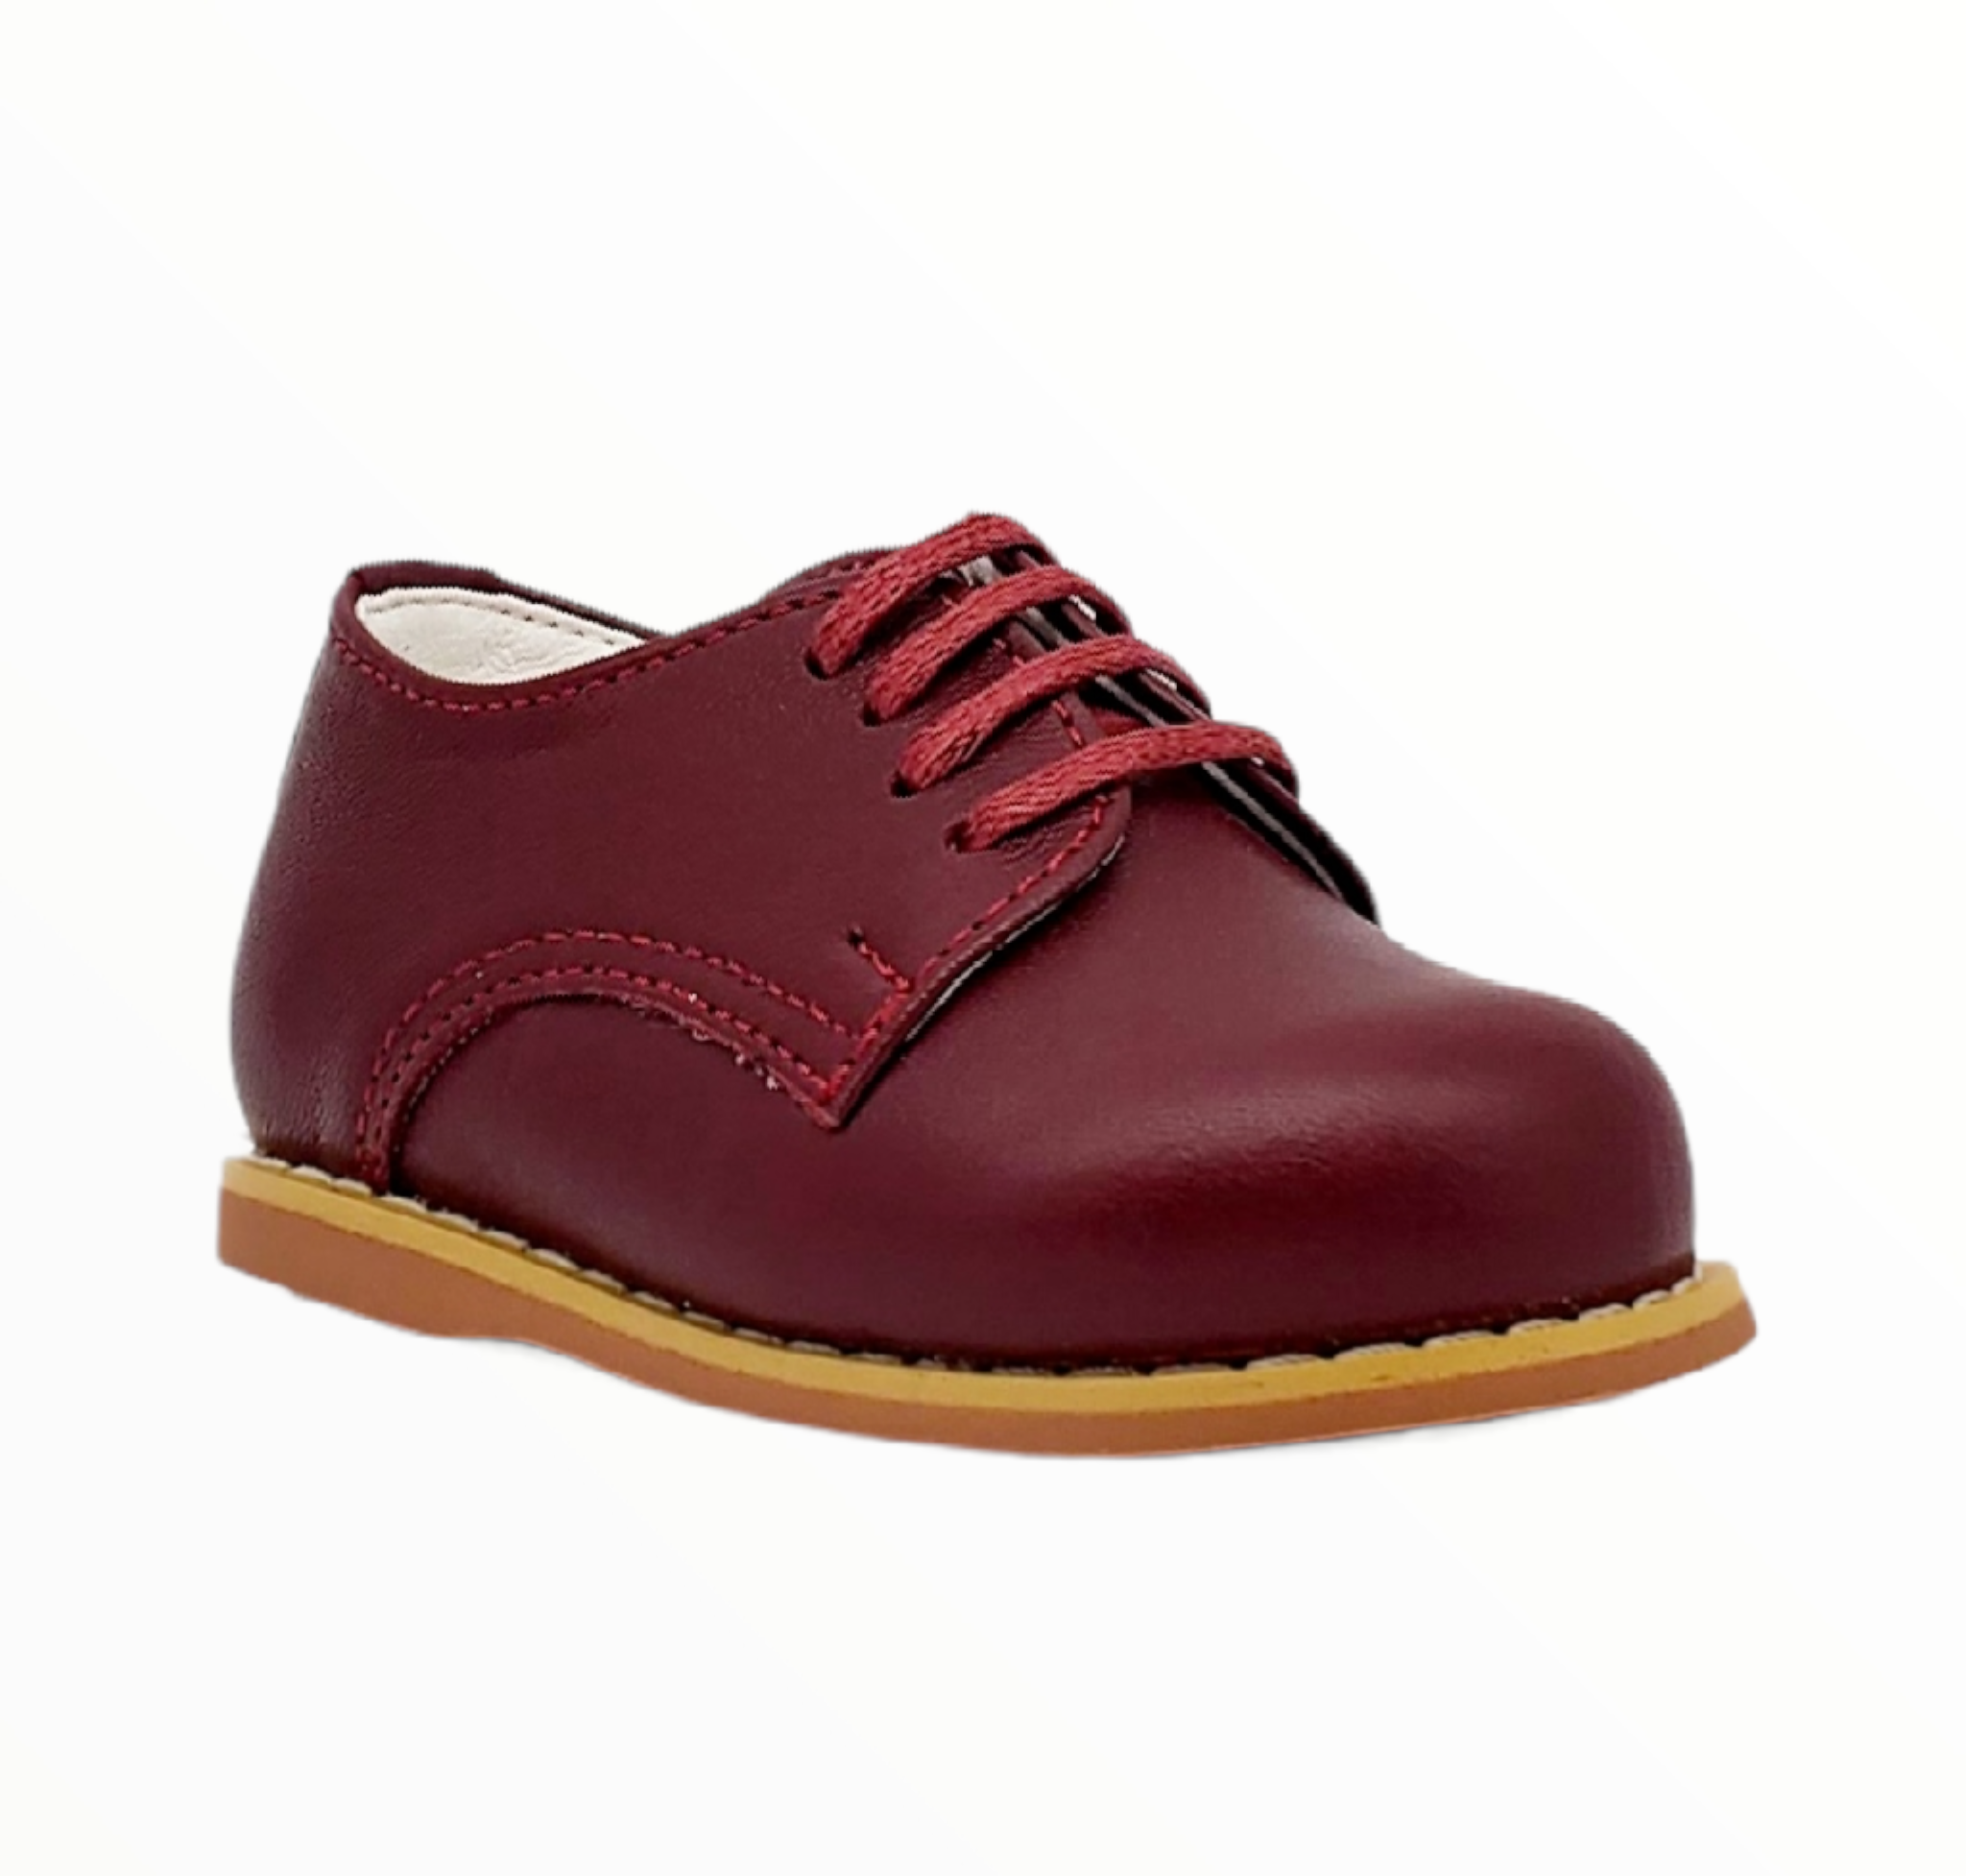 Classic Walkers - Burgundy Low Top - Tippy Tot Shoes